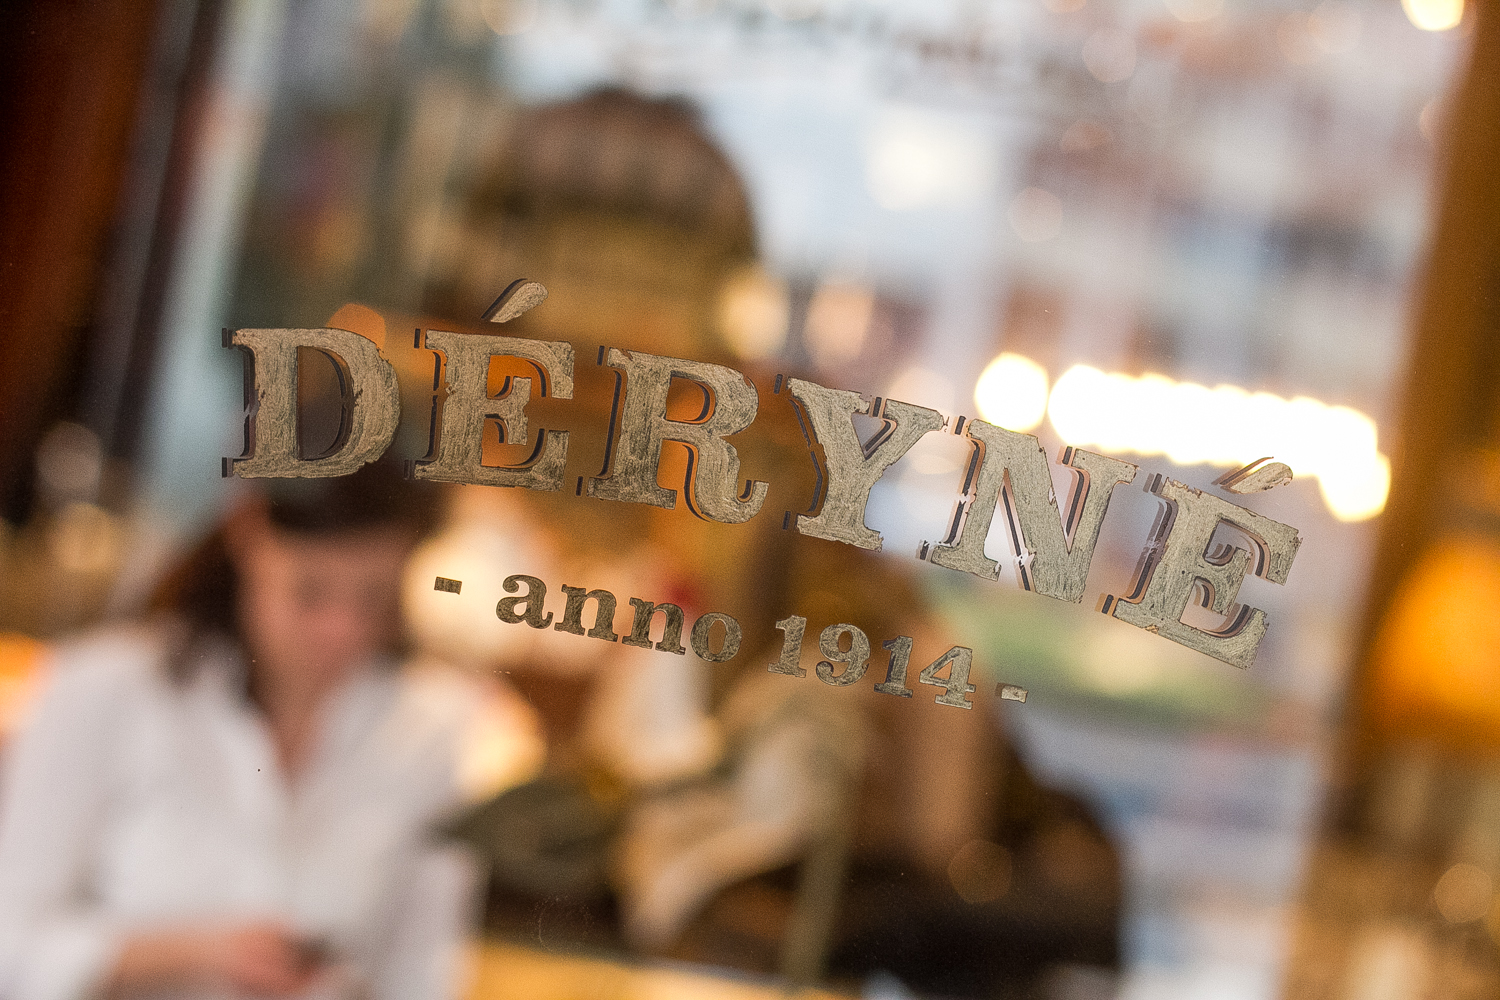 We visited the 101-year-old Déryné Bistro - and you should too!